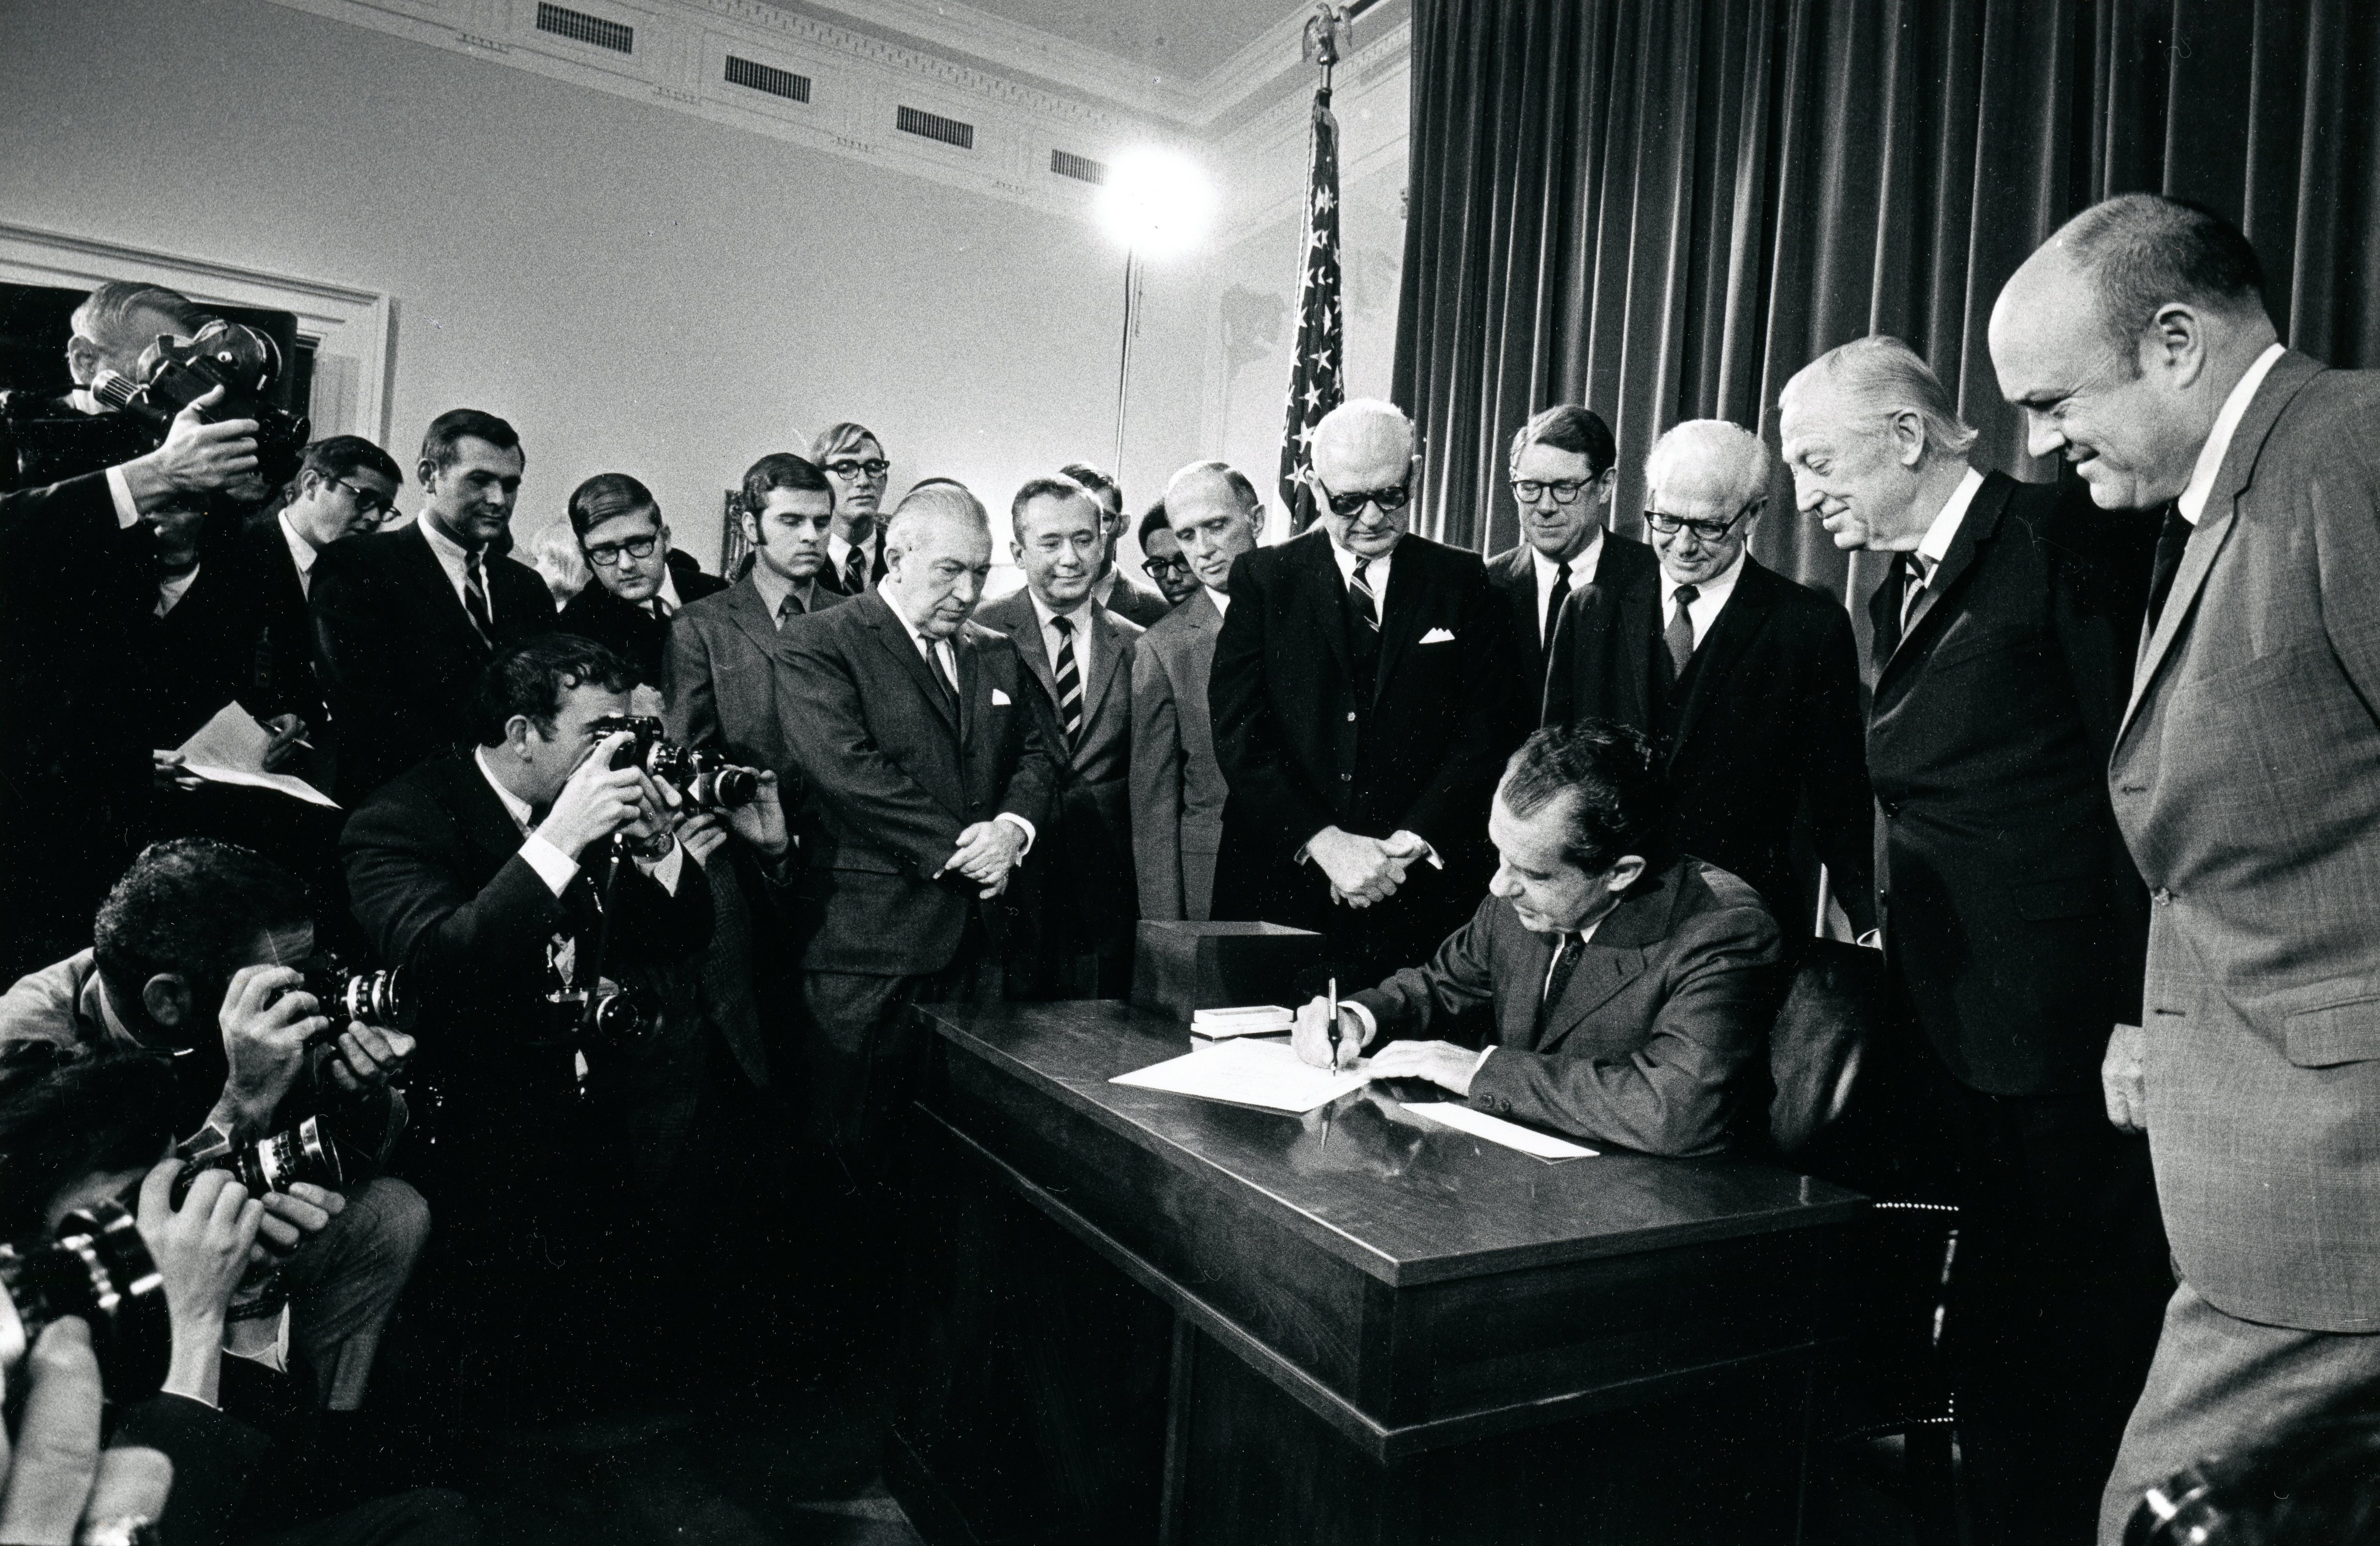 4a. President Nixon speaking to the press corps and signing an act to amend the Military Selective Services Act of 1967 Draft Lottery Bill 11-26-1969 2496-10A (1)